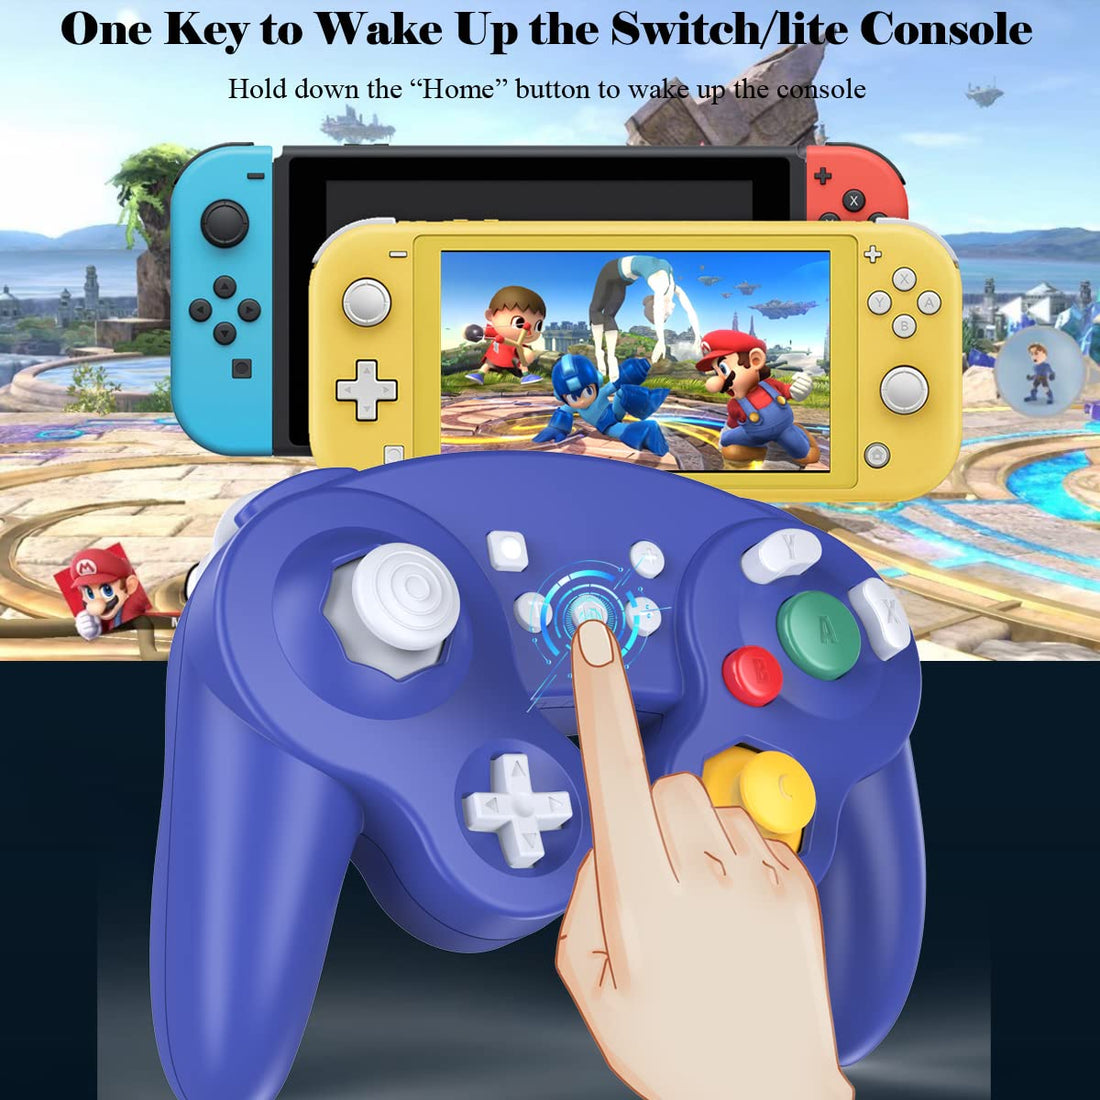 Exlene Wireless Gamecube Controller Switch, Compatible with Nintendo Switch and PC, Rechargeable, Motion Controls, Rumble, Turbo (Bluetooth Version)